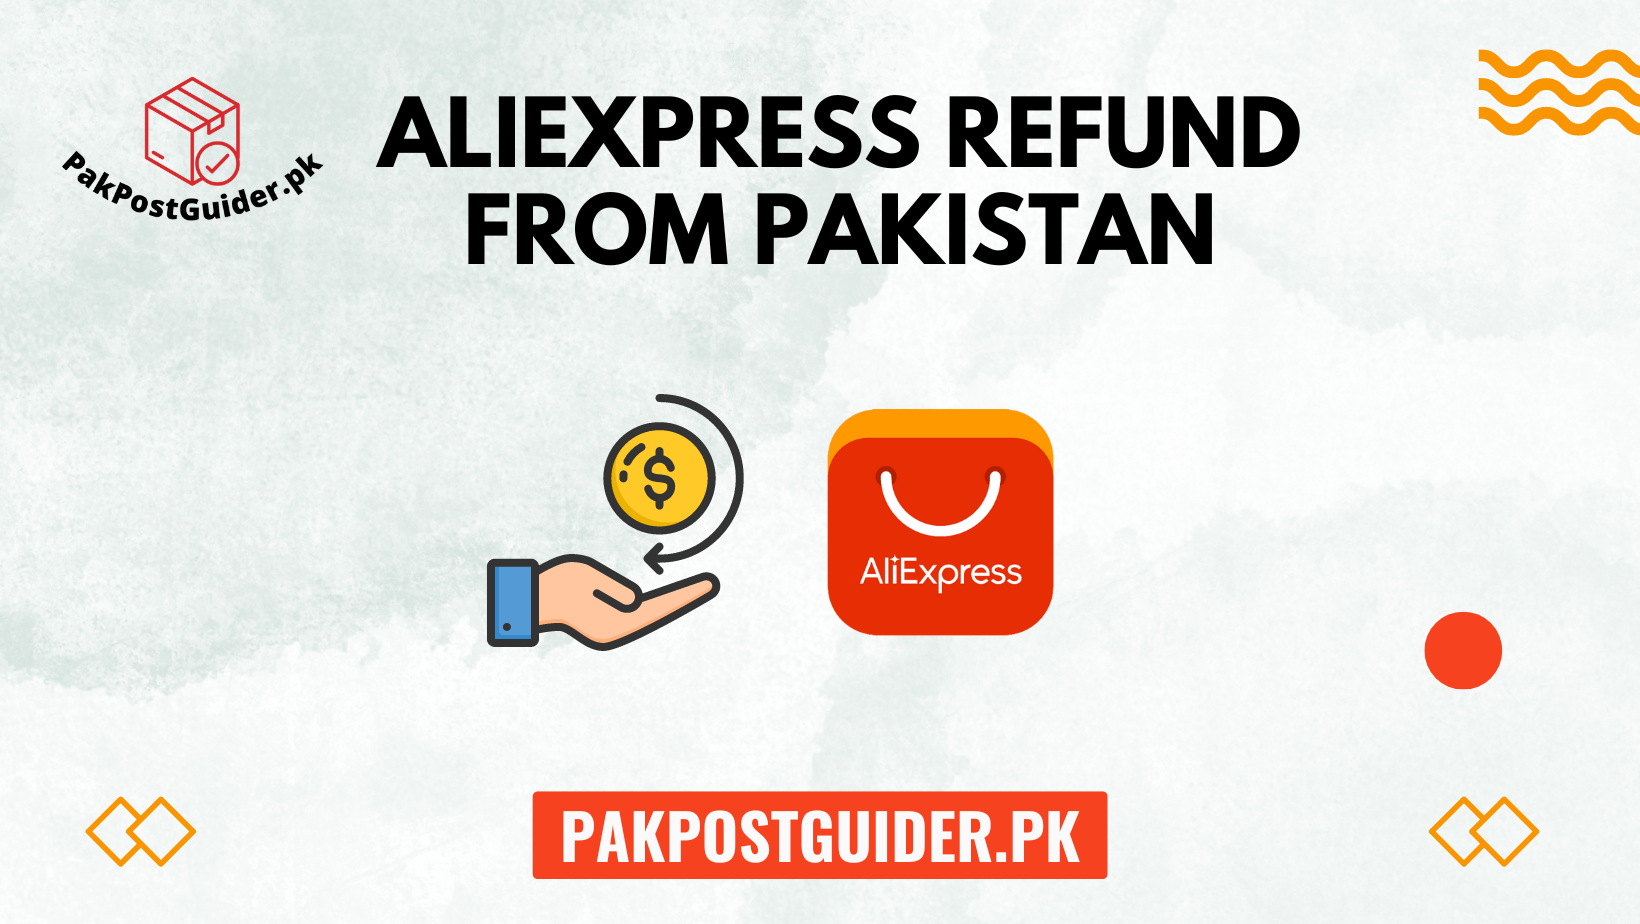 How to Get a Refund from AliExpress in Pakistan?